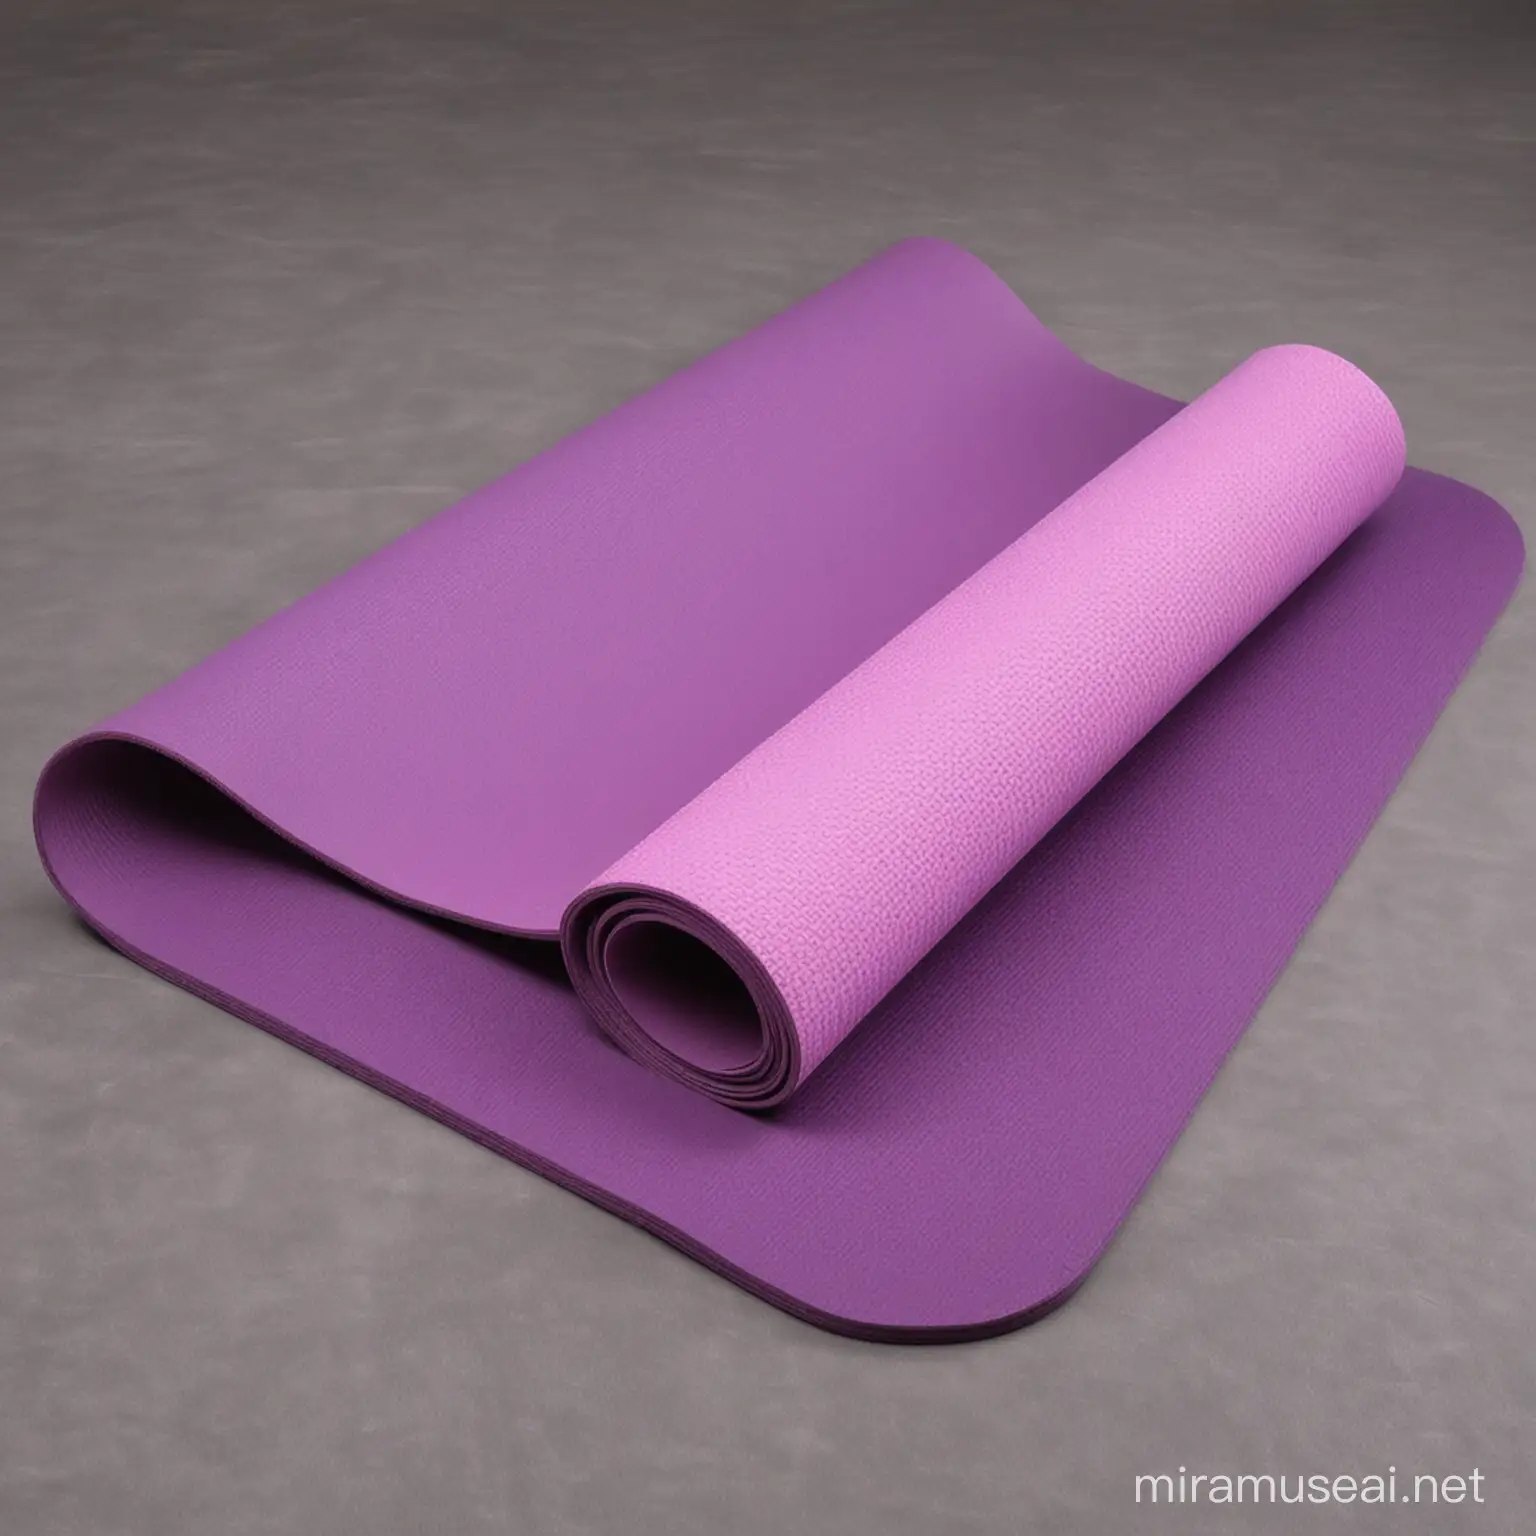 Vibrant Yoga Rubber Mat for Comfortable Practice